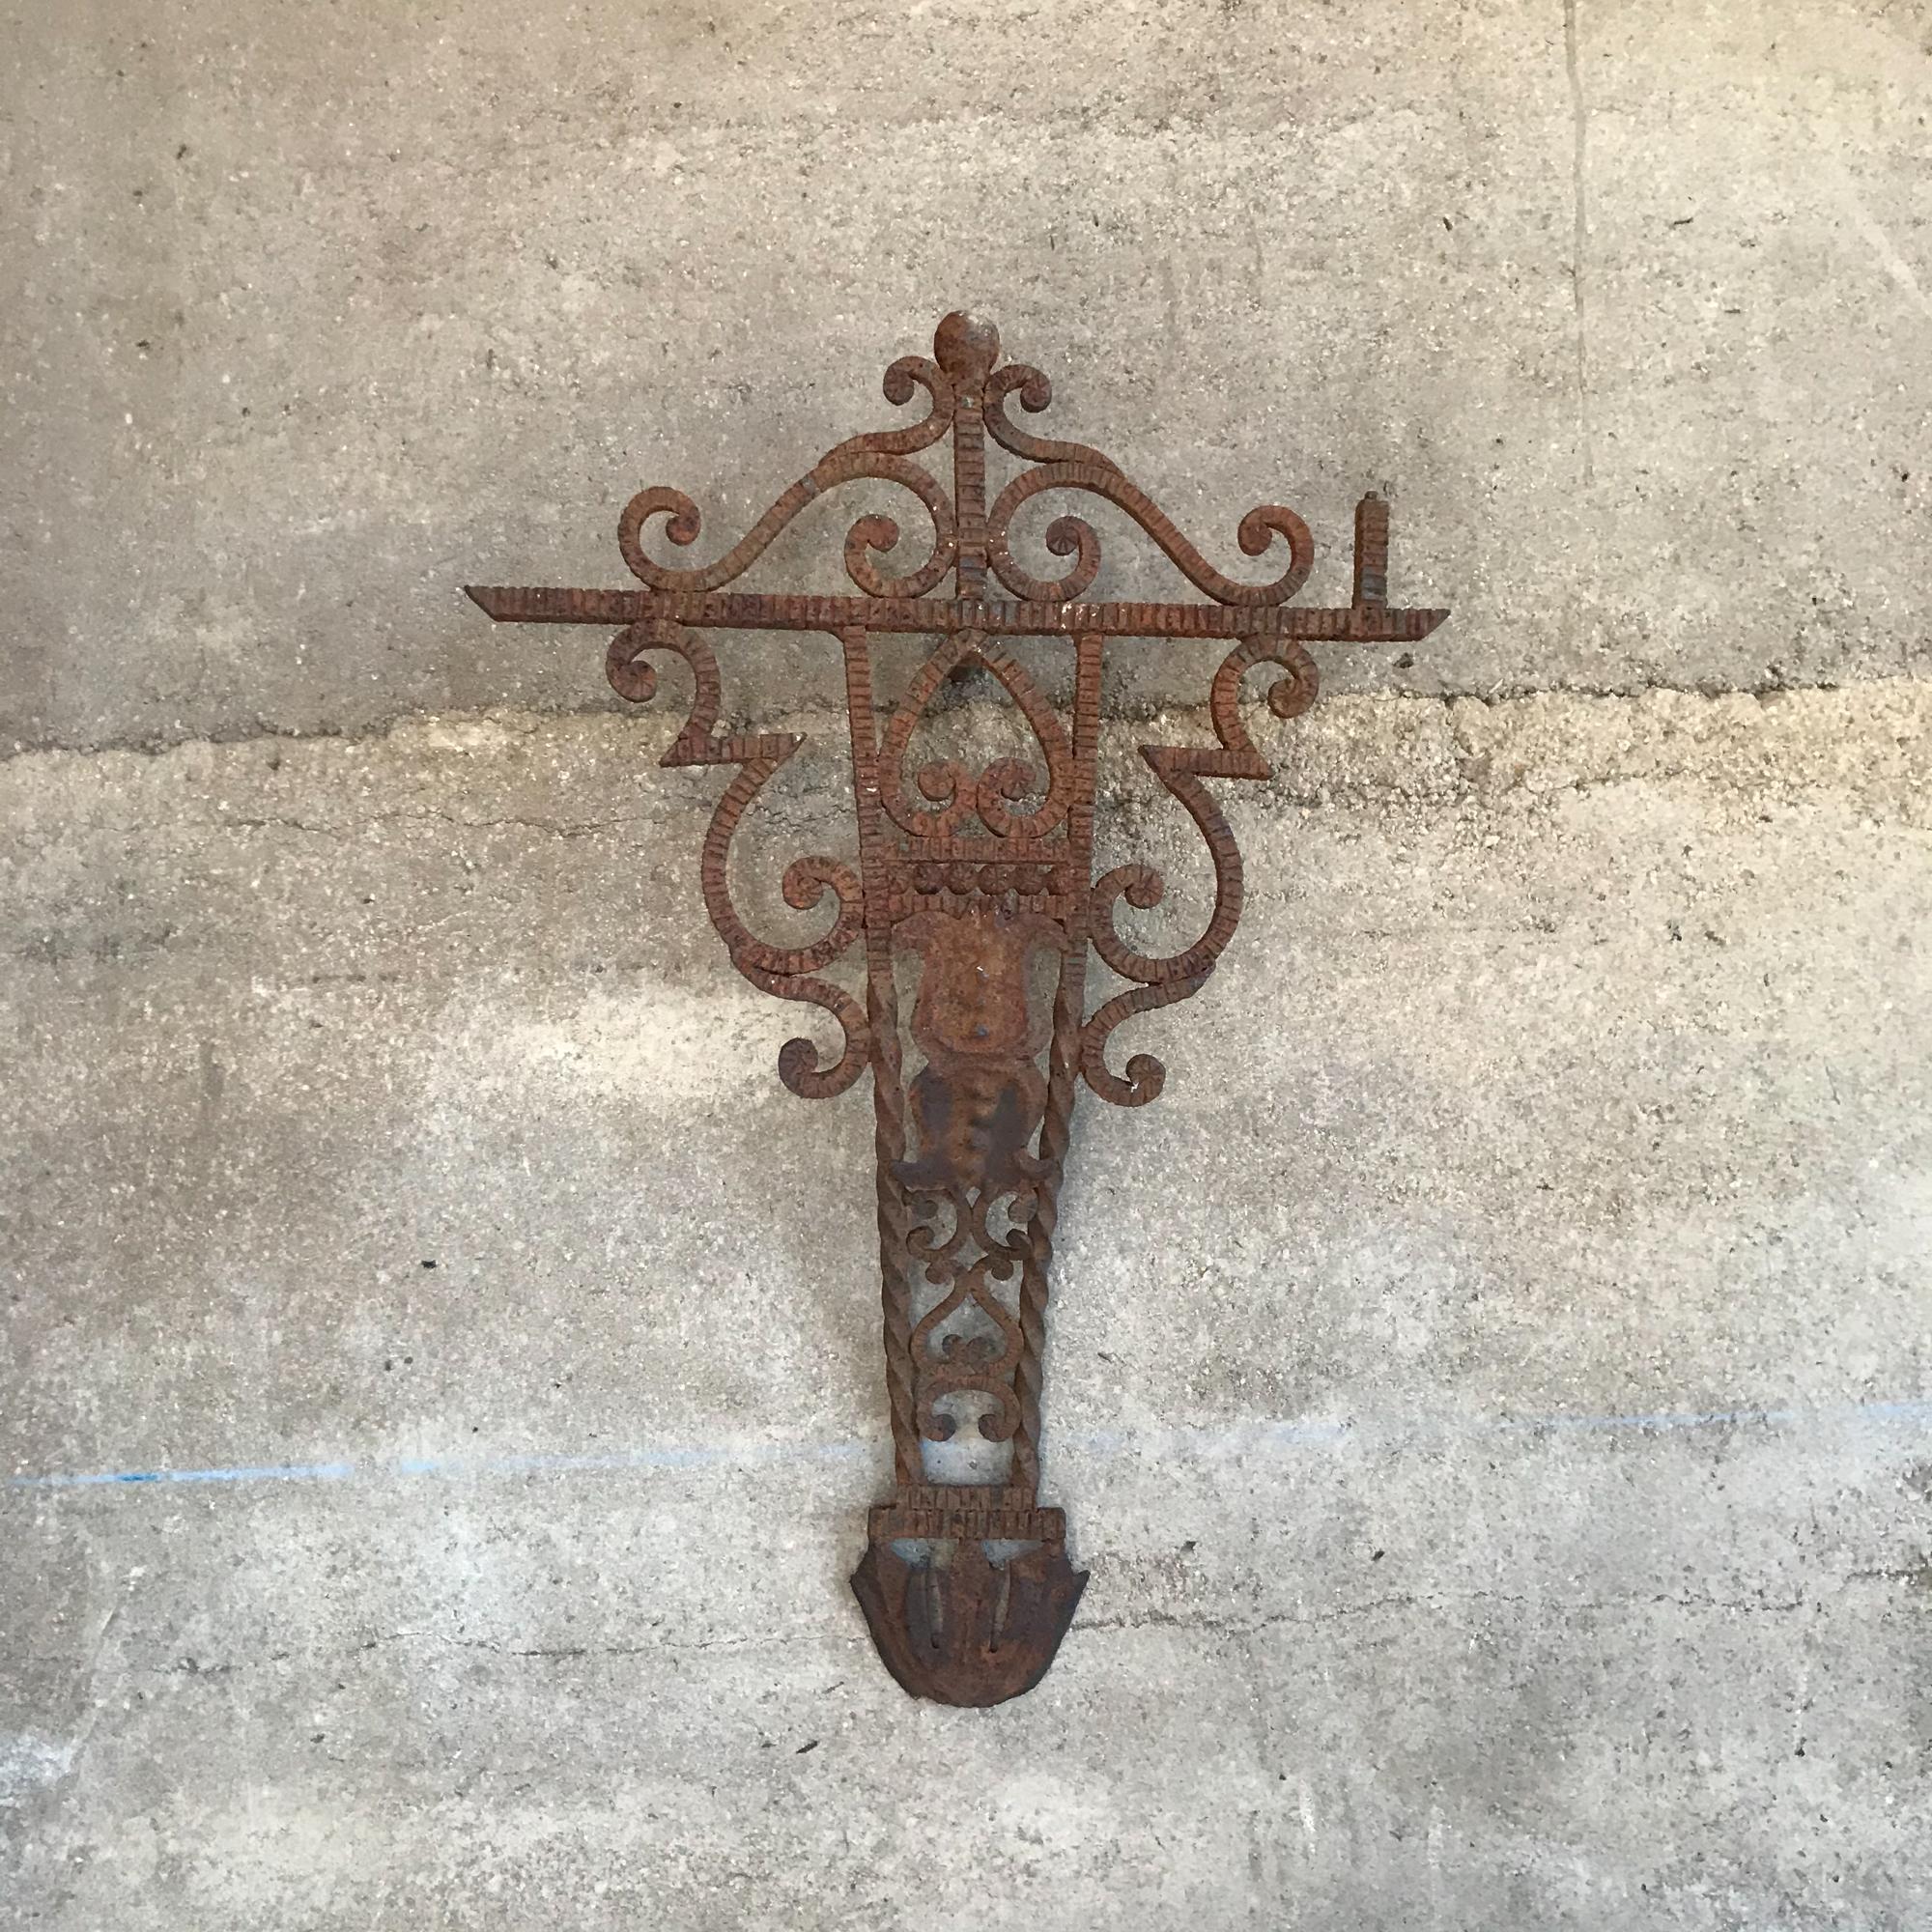 Stunning antique Art architectural salvage Wall Cross in cast iron, Mexico circa 1920s
Ornate intricate detail rustic beauty in a brilliant design.
Dimensions: 20